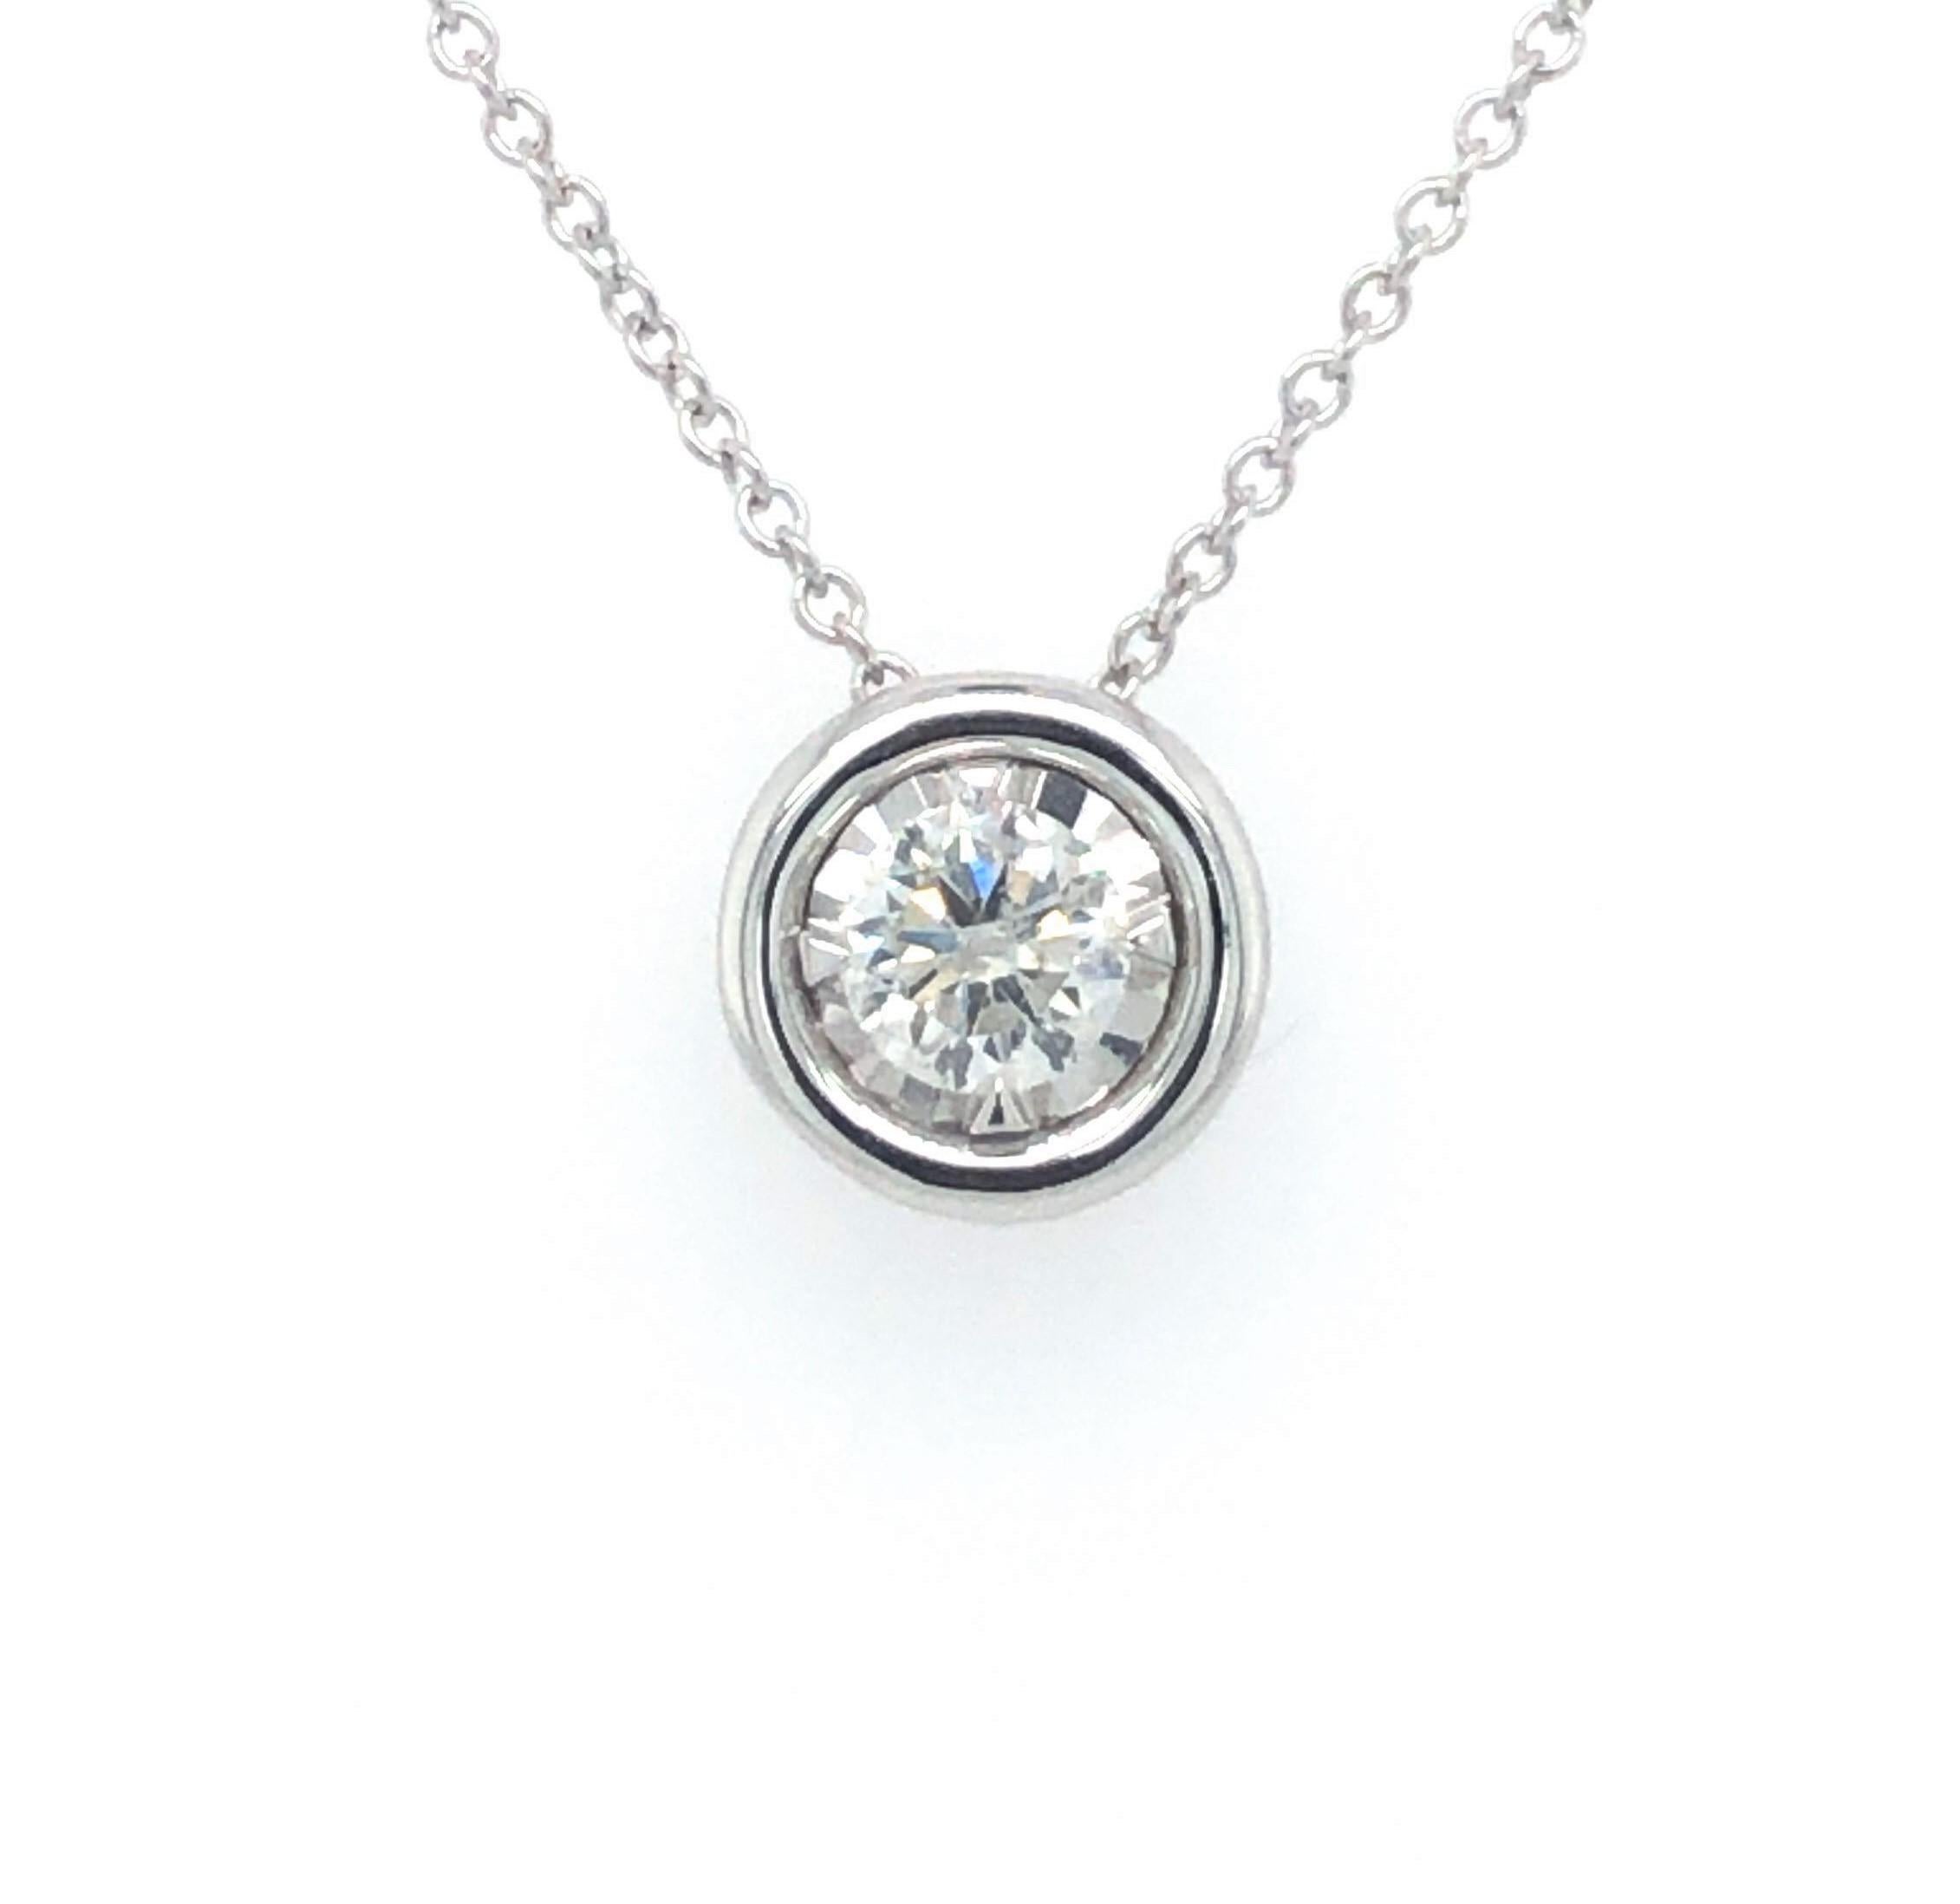 Effy 14k White Gold 0.50cttw Bezel Diamond Station Necklace Adjustable Length

Condition:  Excellent Condition, Professionally Cleaned and Polished
Metal:  14k Gold (Marked, and Professionally Tested)
Weight:  3.4g
Length:  Adjustable - 15.75